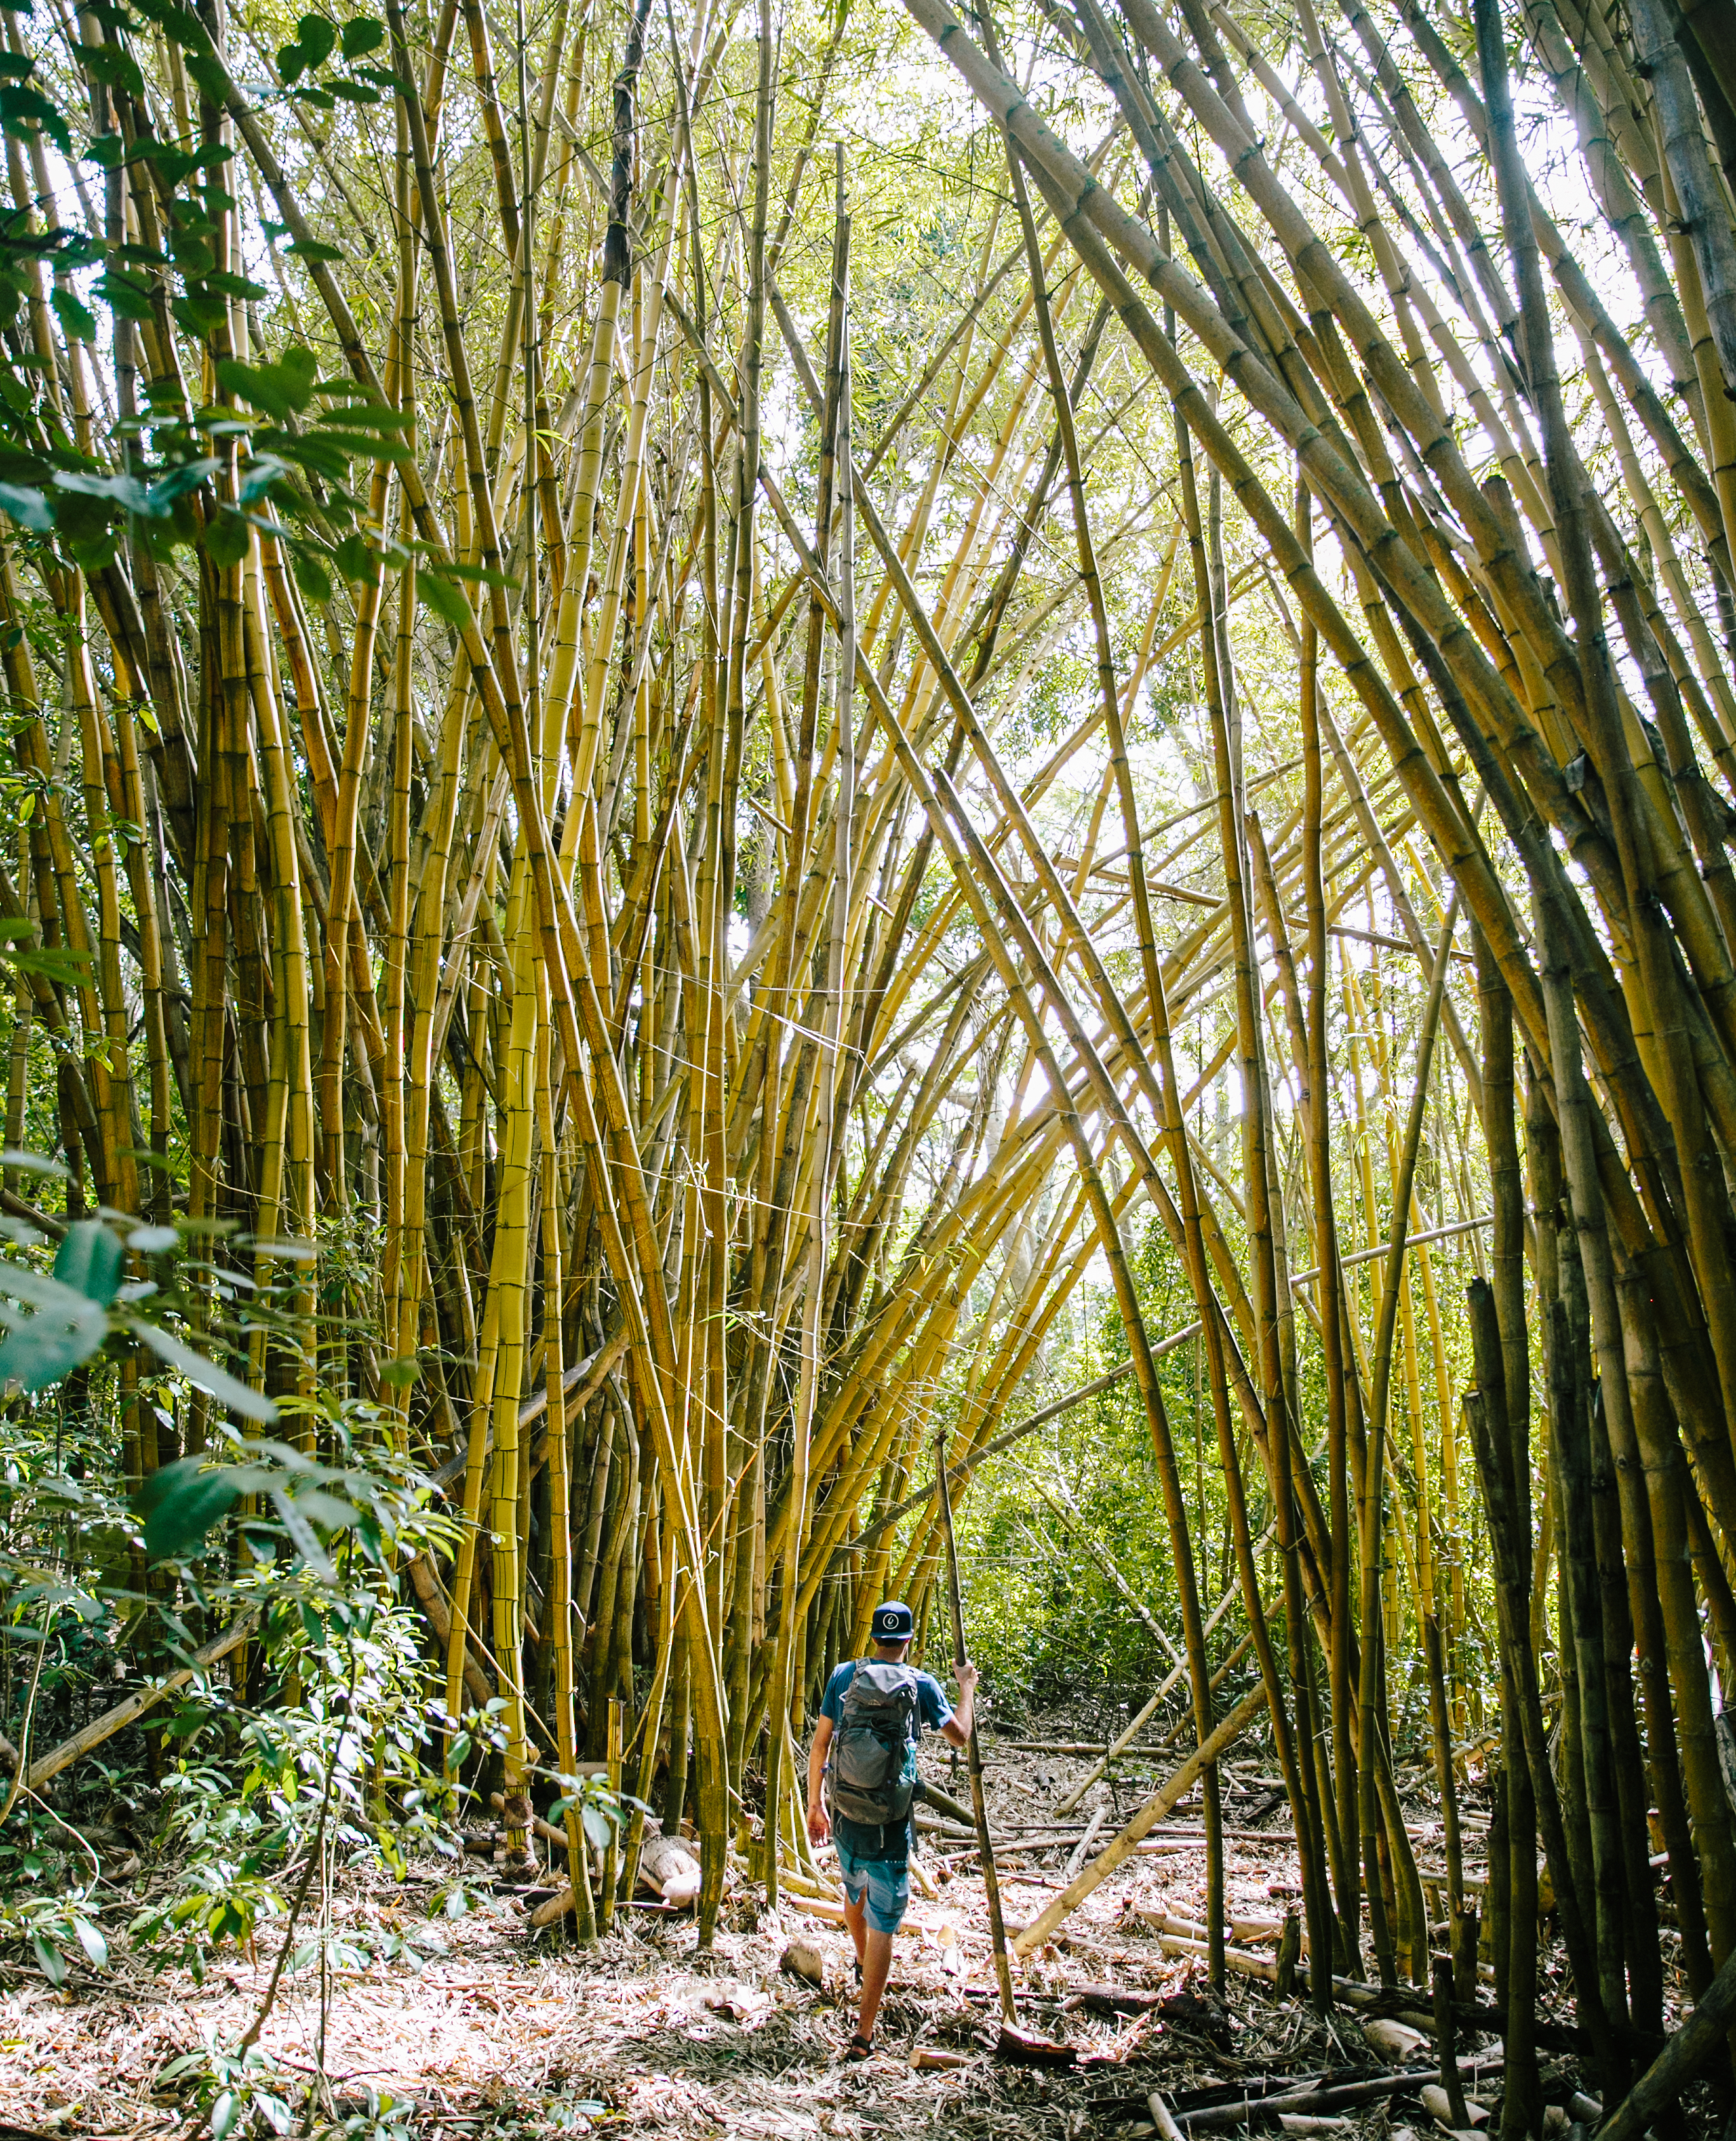 Bamboo Forest in Kauai | Travel Guide to Kauai, Hawaii | Travel Tips for Kauai | Packing List for Kauai | Helpful Tips for Traveling to Kauai | Kauai Travel Guide | Hawaii Travel Guide | Why You Should Visit Hawaii | Napali Coast Boat Excursion | Activities To Do in Kauai | Best Vacation Places in the World via @elanaloo + elanaloo.com